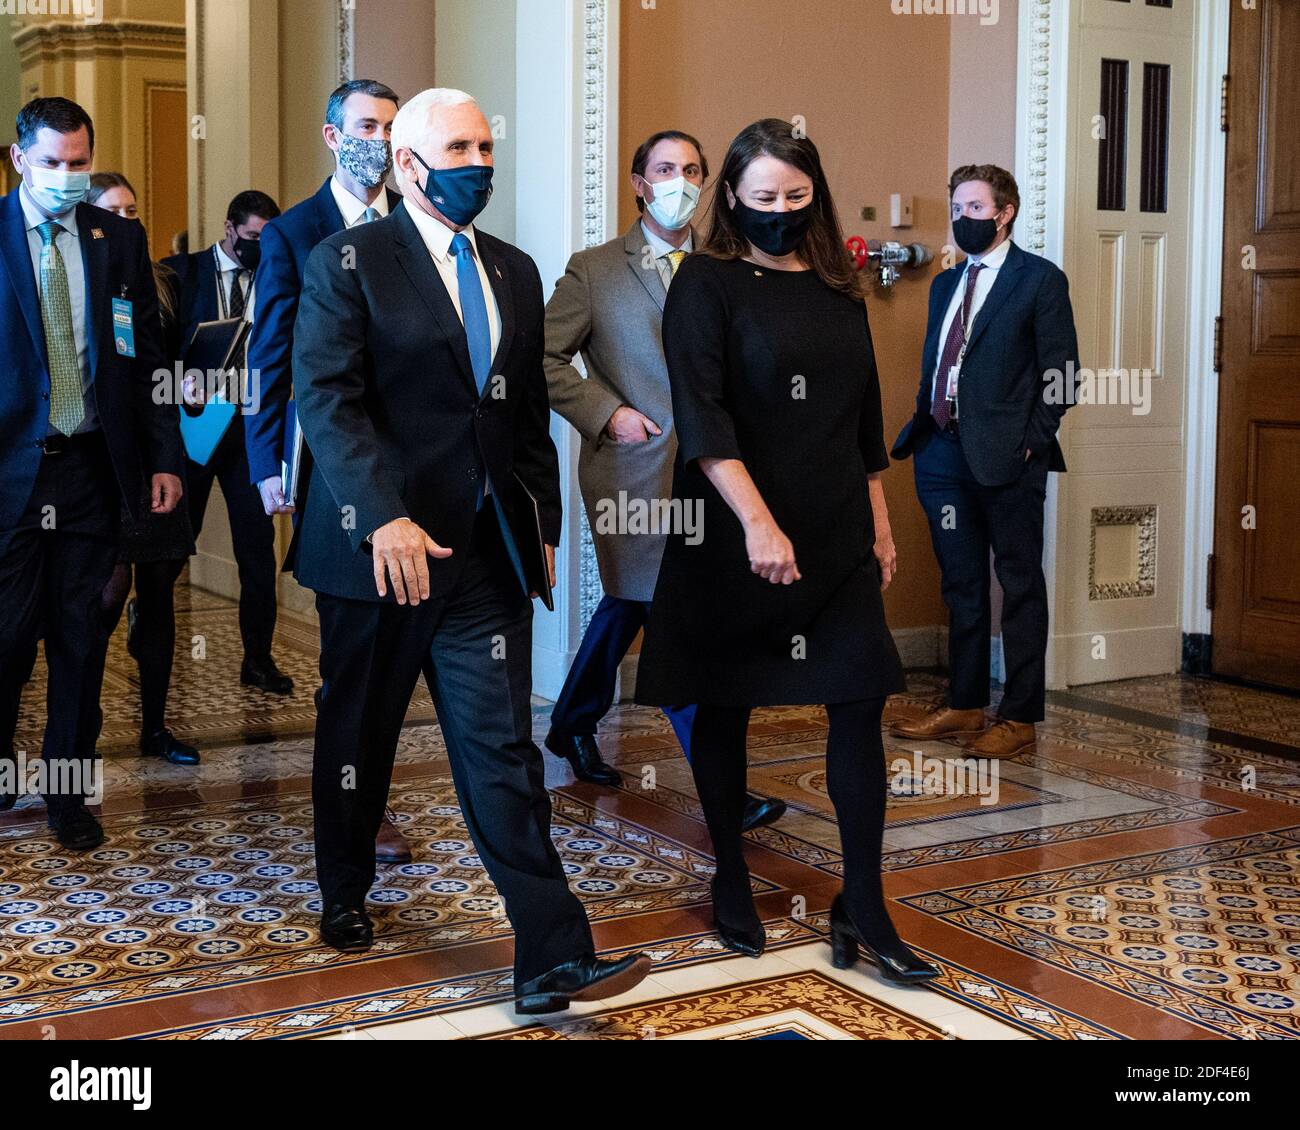 Washington, United States. 02nd Dec, 2020. Former Vice President Mike Pence leaving the Senate Chamber after the swearing-in of U.S. Senator Mark Kelly (D-AZ) as a Senator. Credit: SOPA Images Limited/Alamy Live News Stock Photo